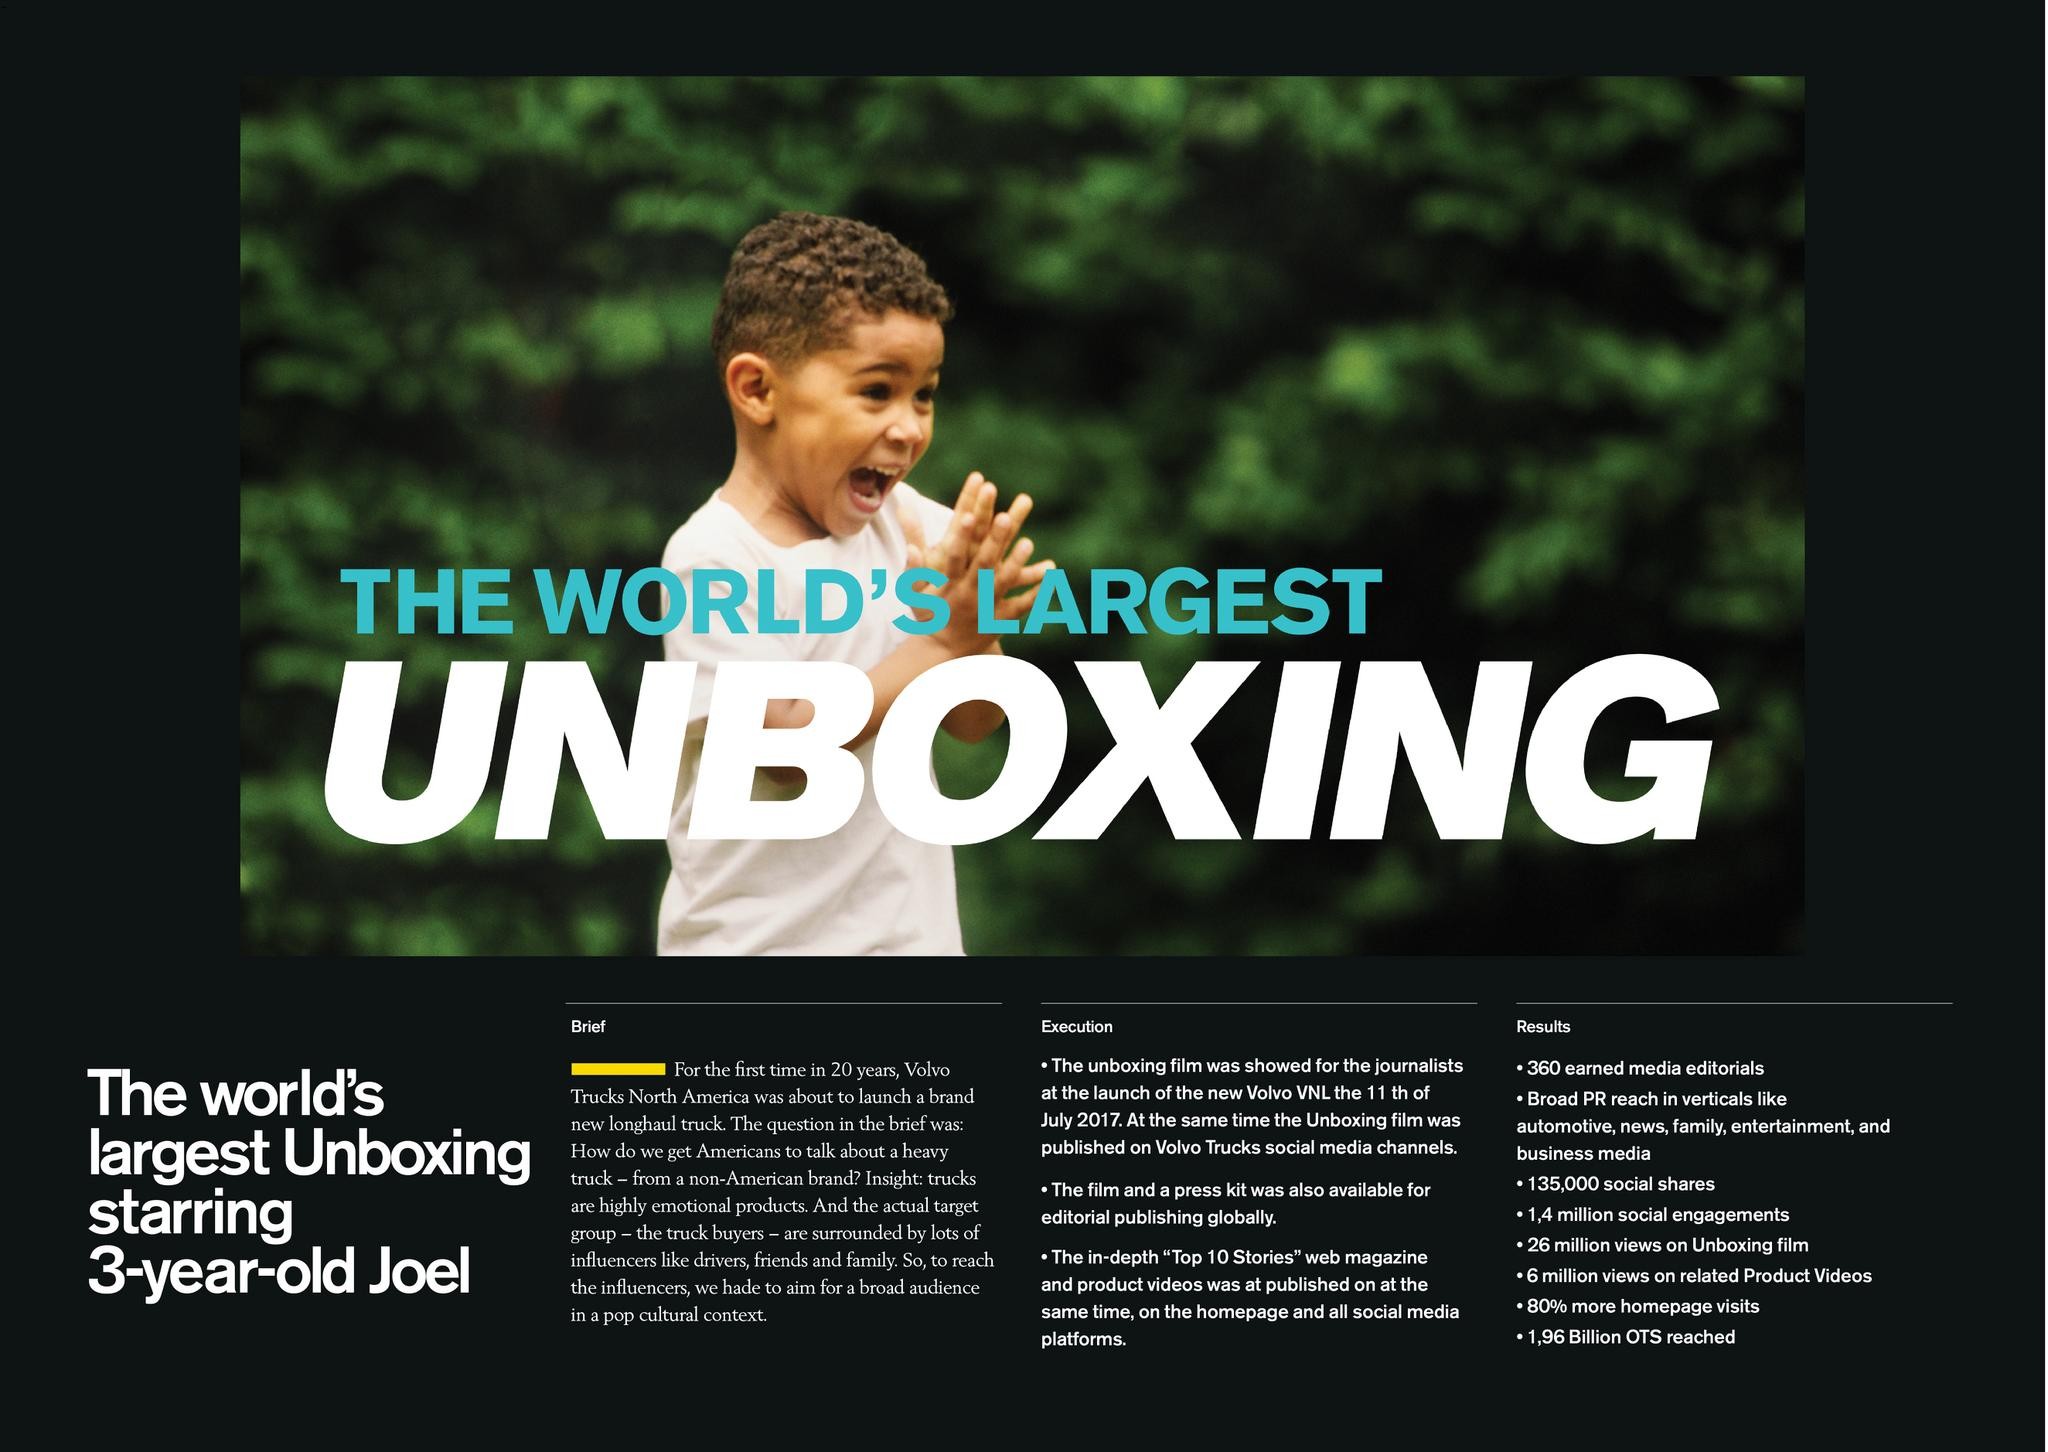 The world’s largest Unboxing starring 3-year-old Joel